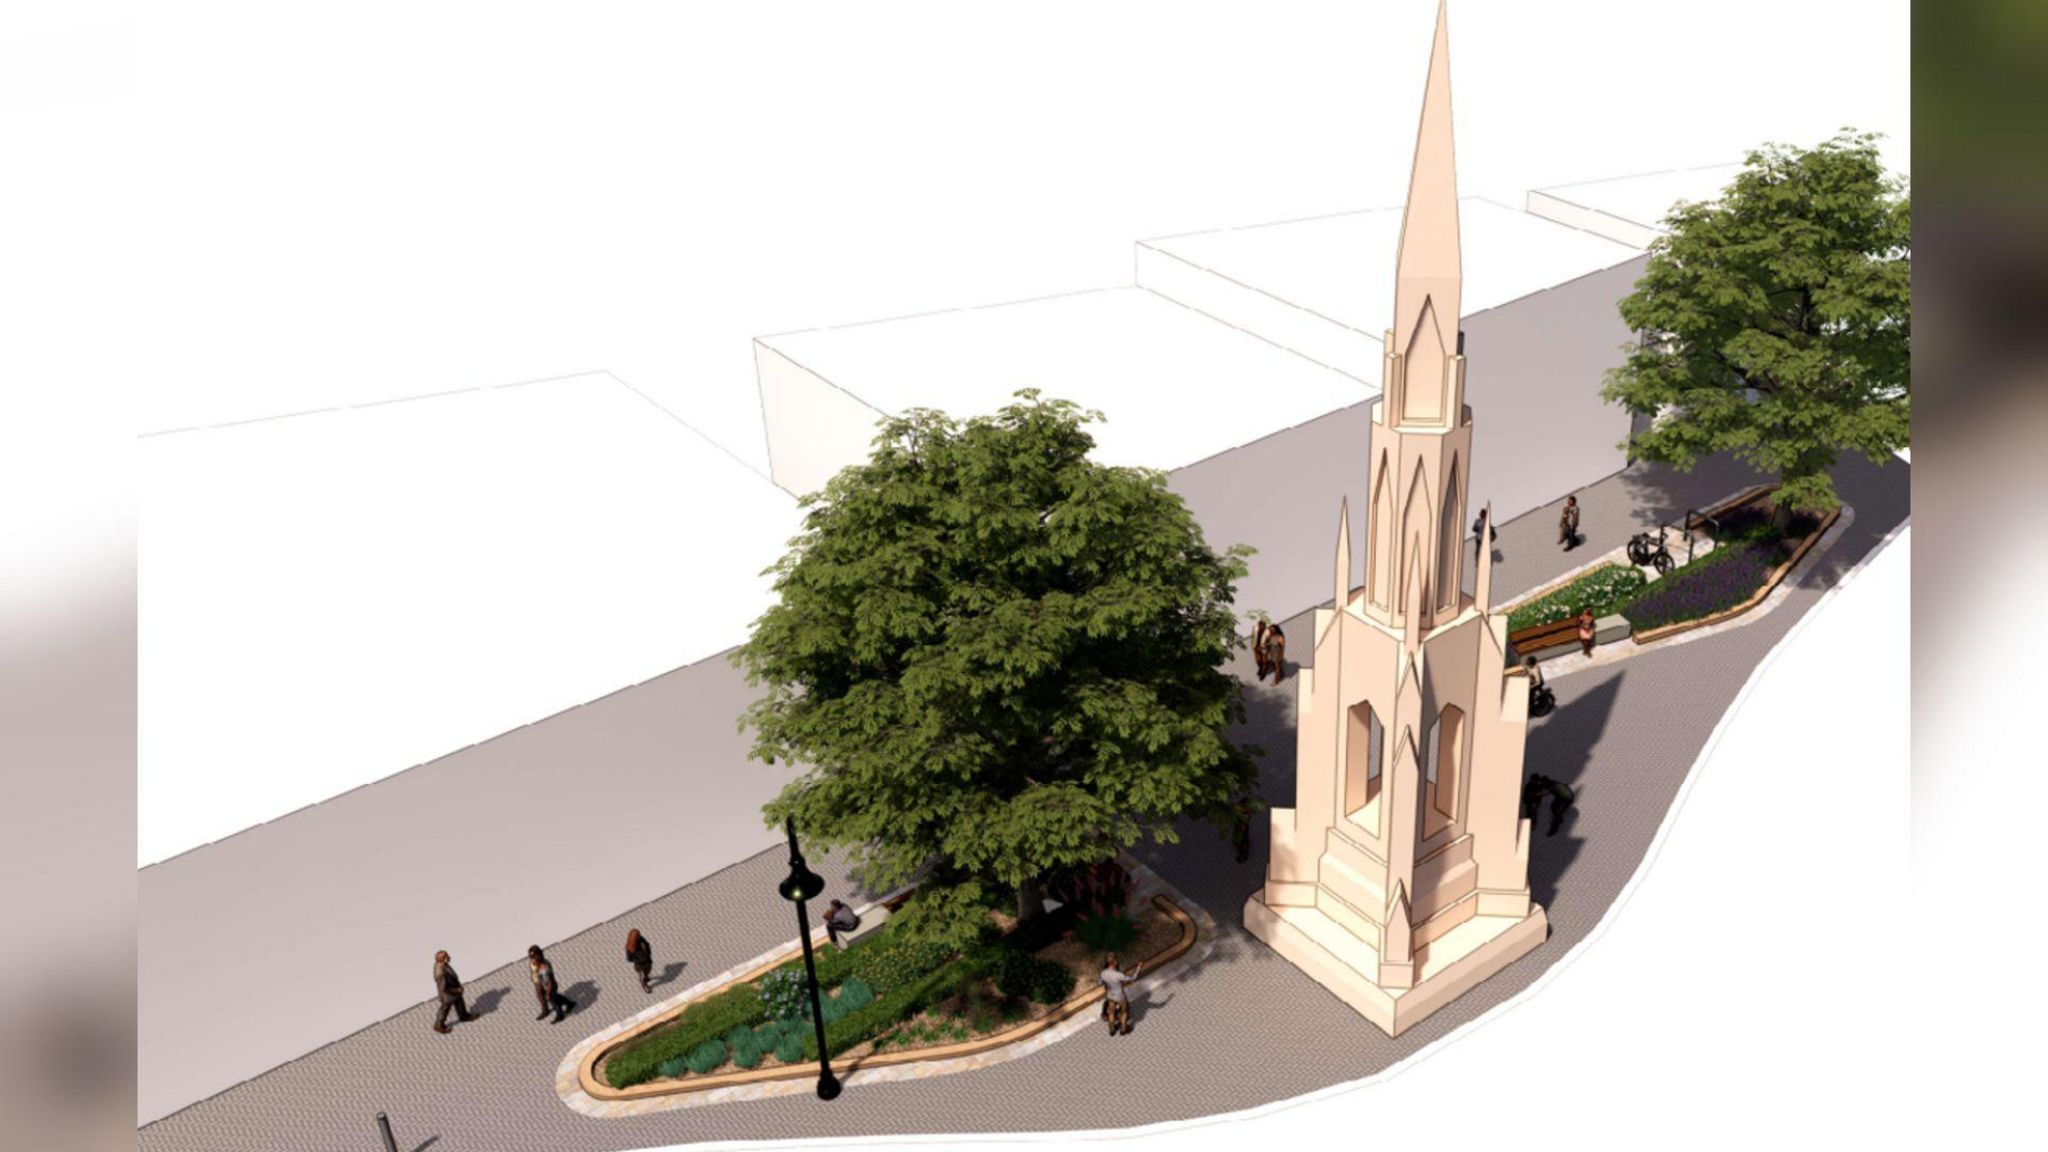 Artist impression of the Handley Monument in Sleaford